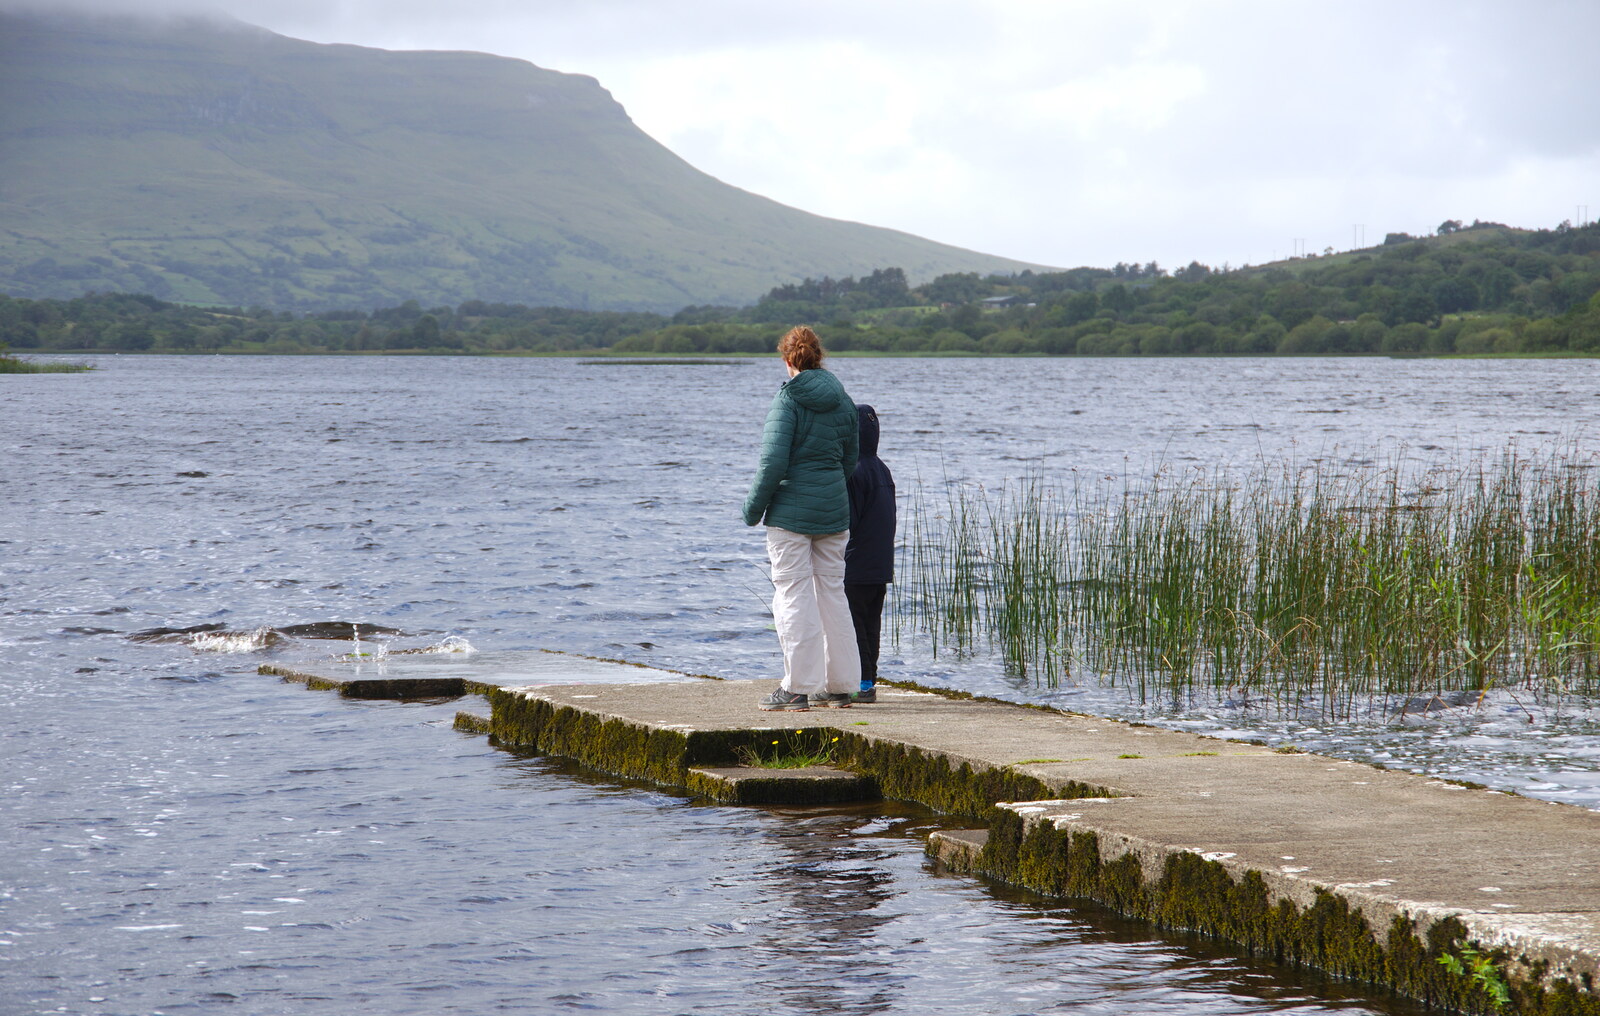 Isobel and Harry on the pier at Lough Glenade from Mullaghmore Beach and Marble Arch Caves, Sligo and Fermanagh, Ireland - 19th August 2019